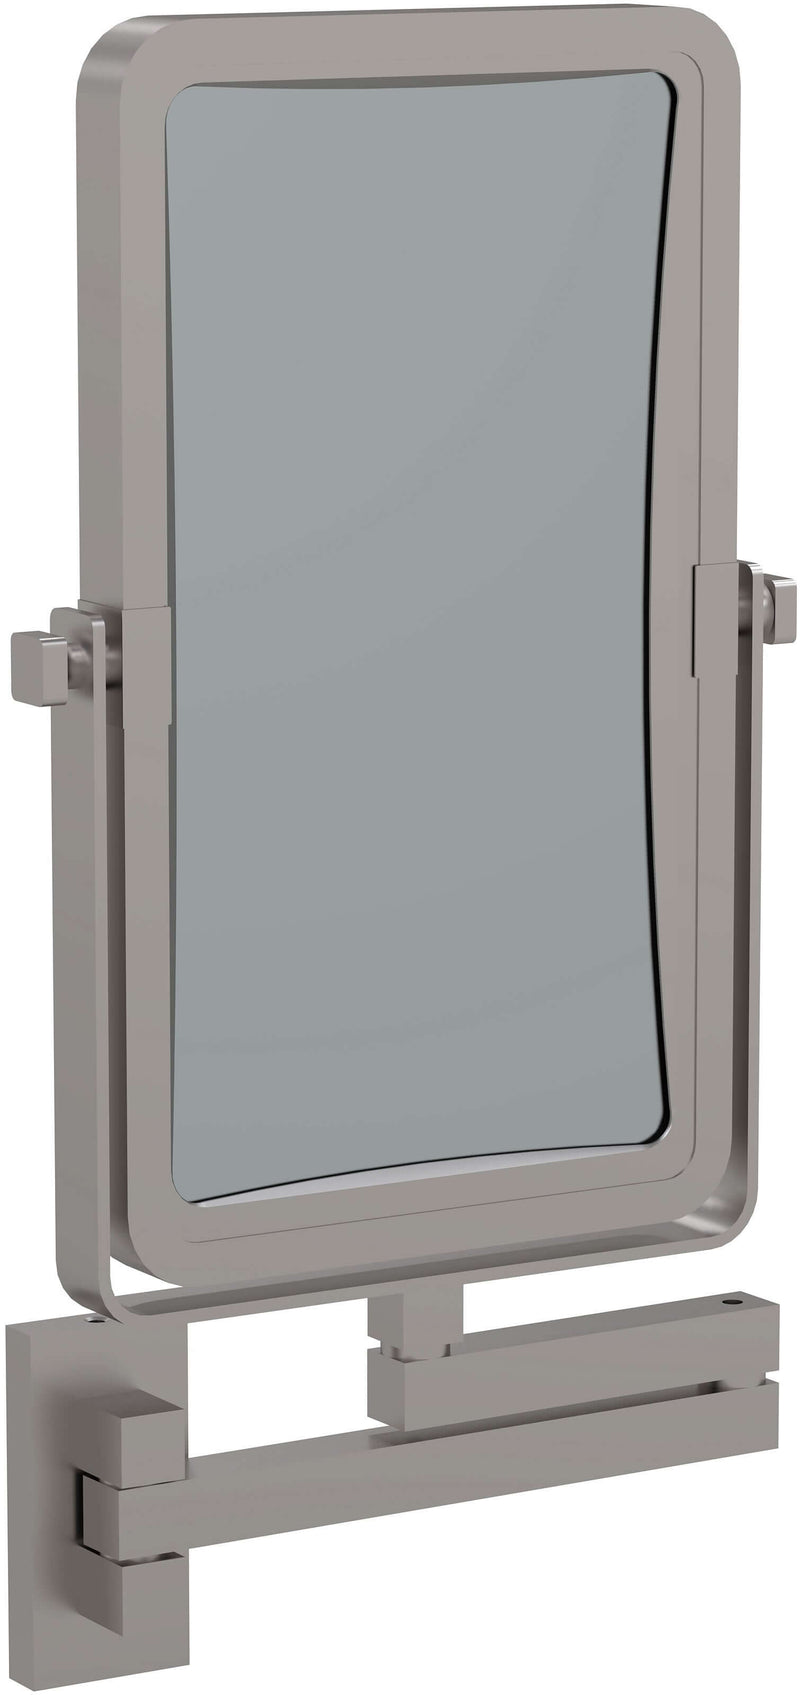 Kimball & Young Mirror Image Extension Makeup Mirror, 3x/1x Reversible, 5 Finishes